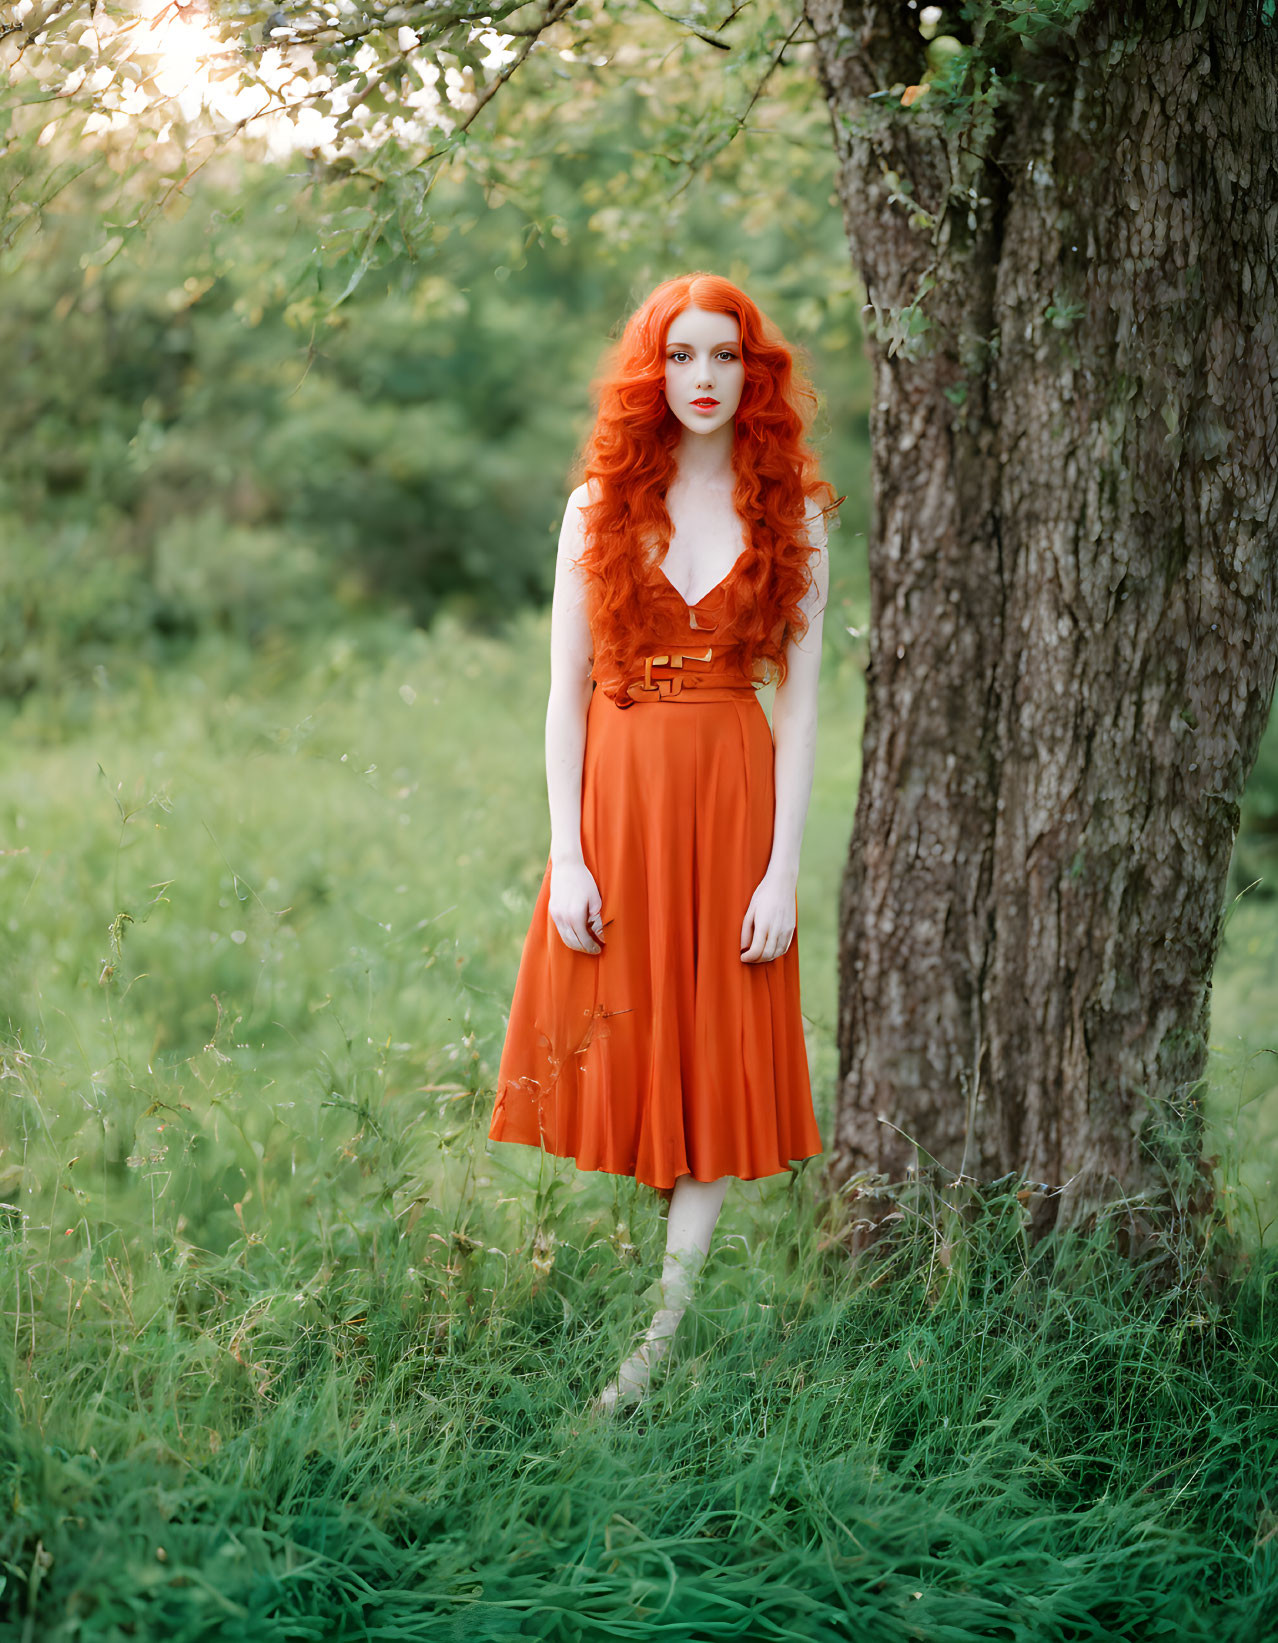 Red-haired person in orange dress near tree in lush green field with sunlight.